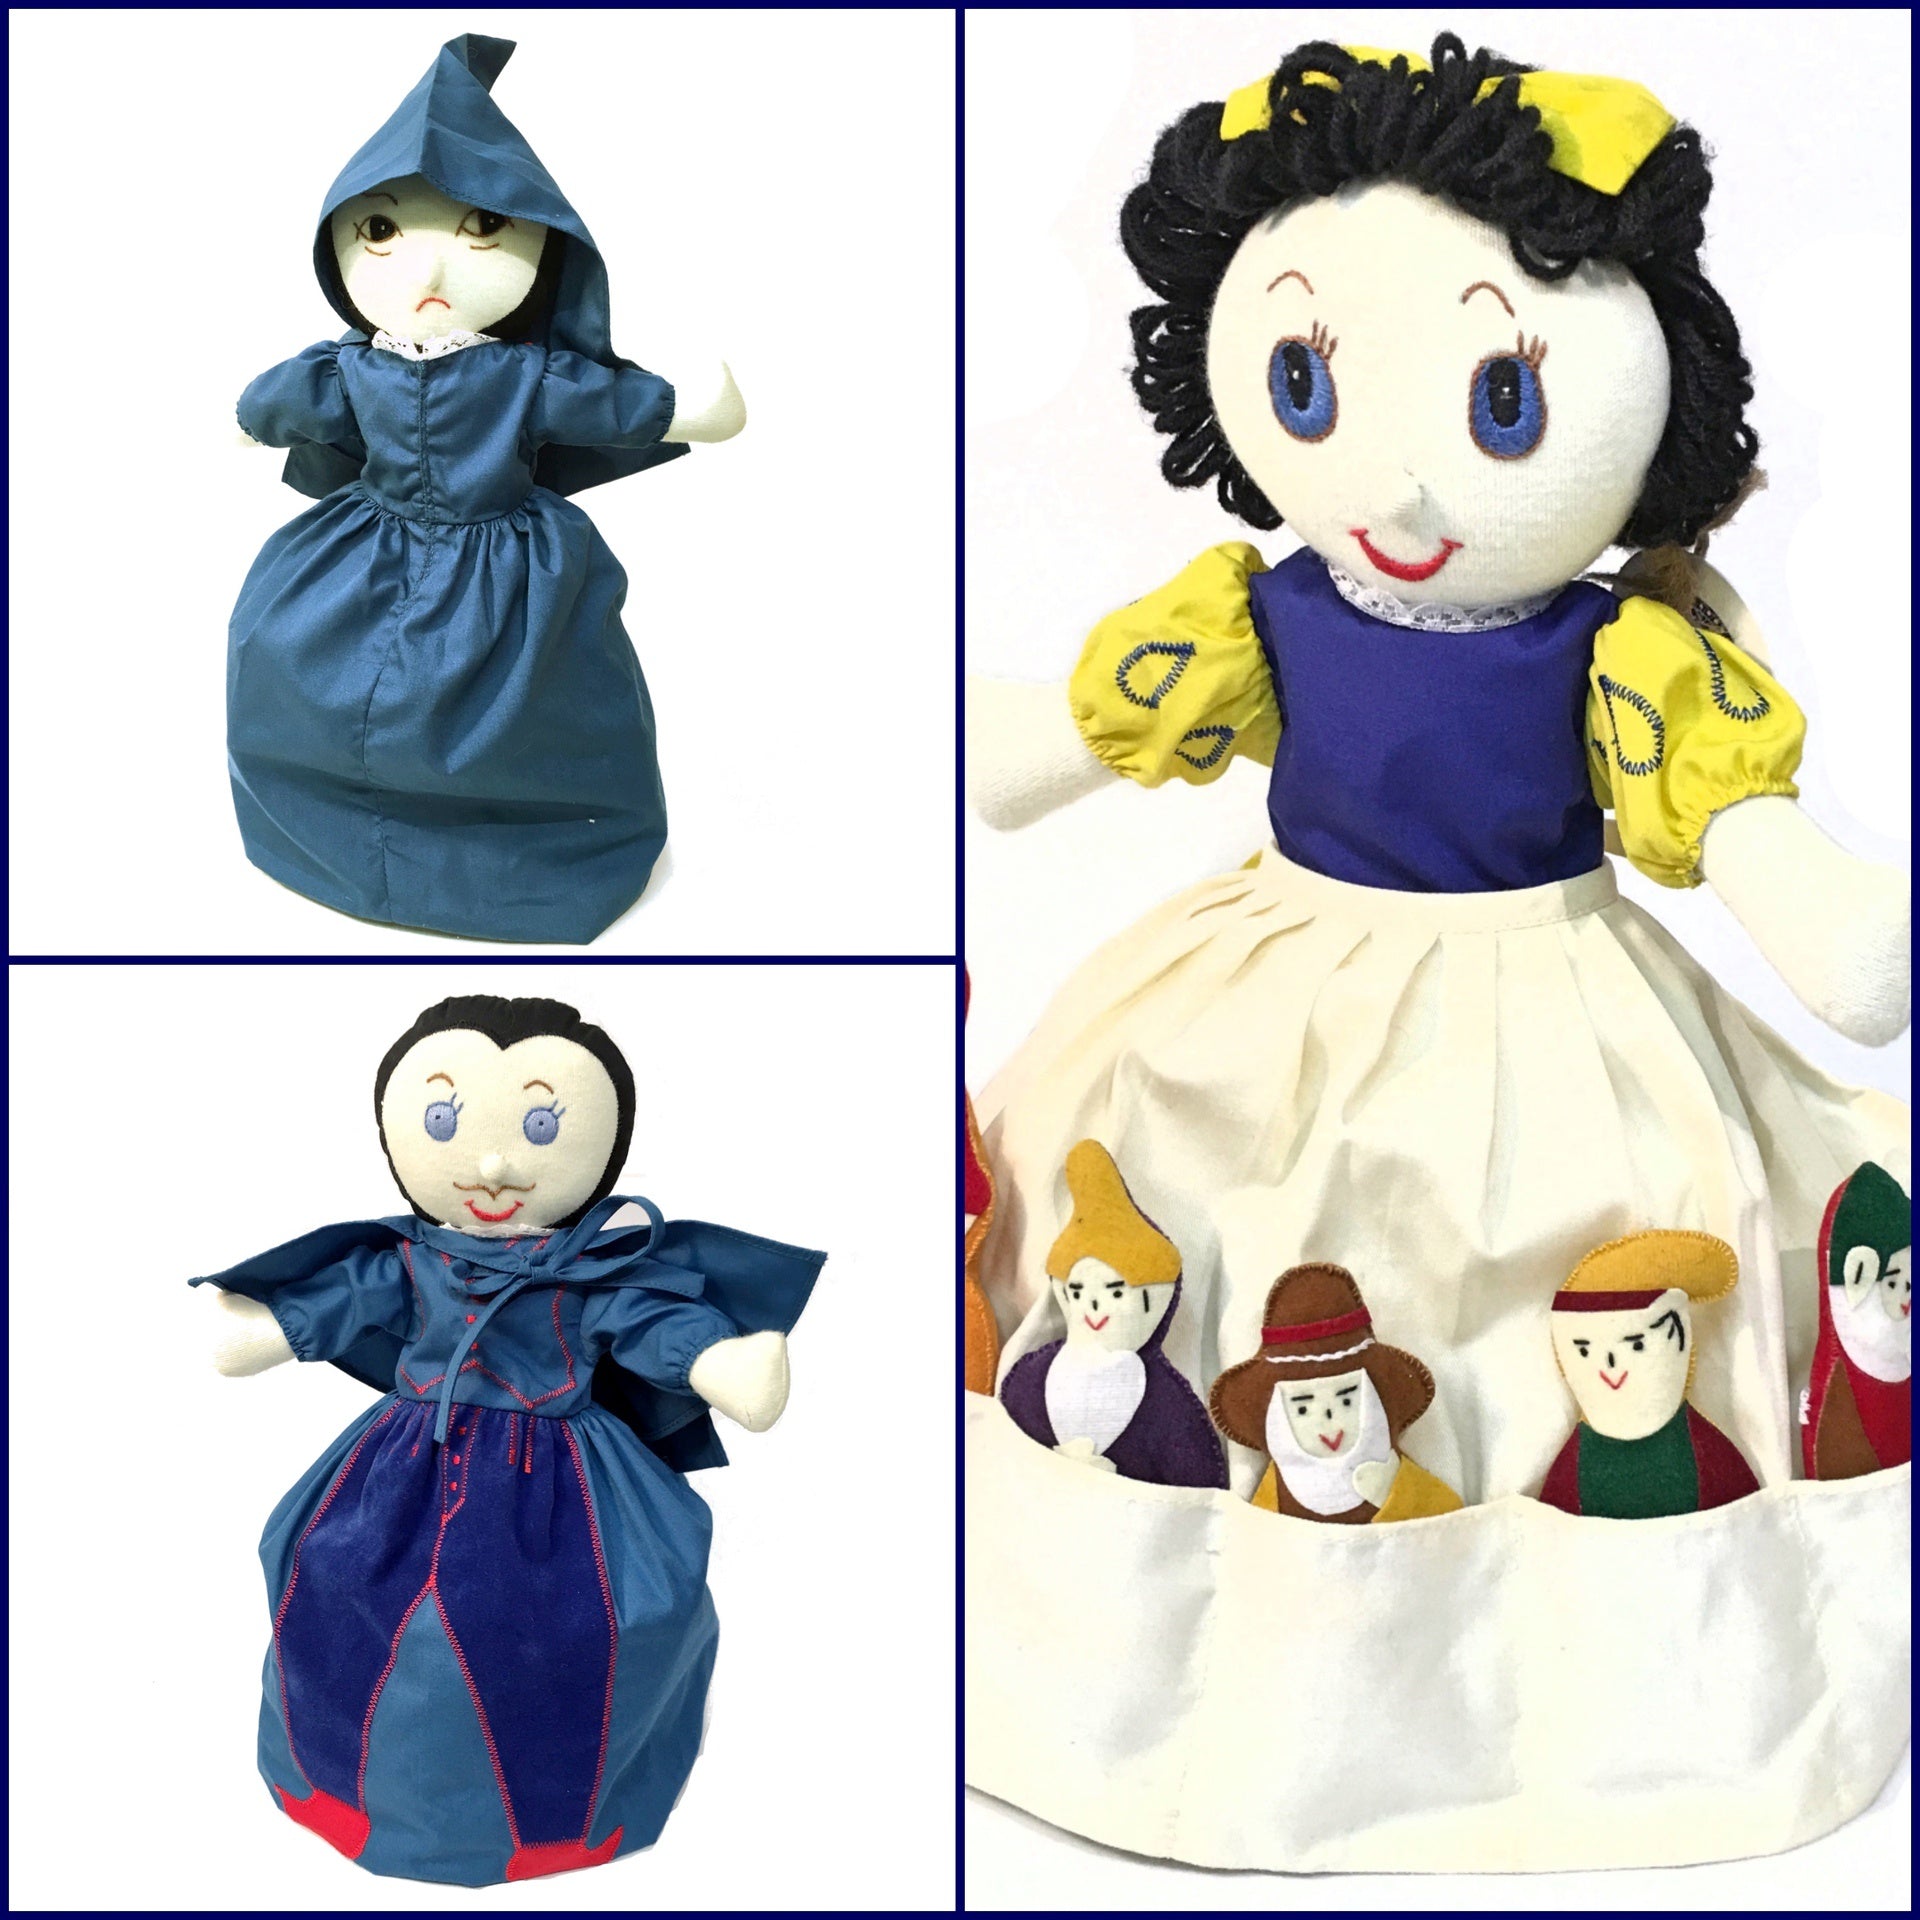 Snow White and the Seven Dwarfs Doll - Upside Down Toy Handmade in Thailand by the Fatima Centre | Shop Ethical Gifts for Children at ONLY JUST |